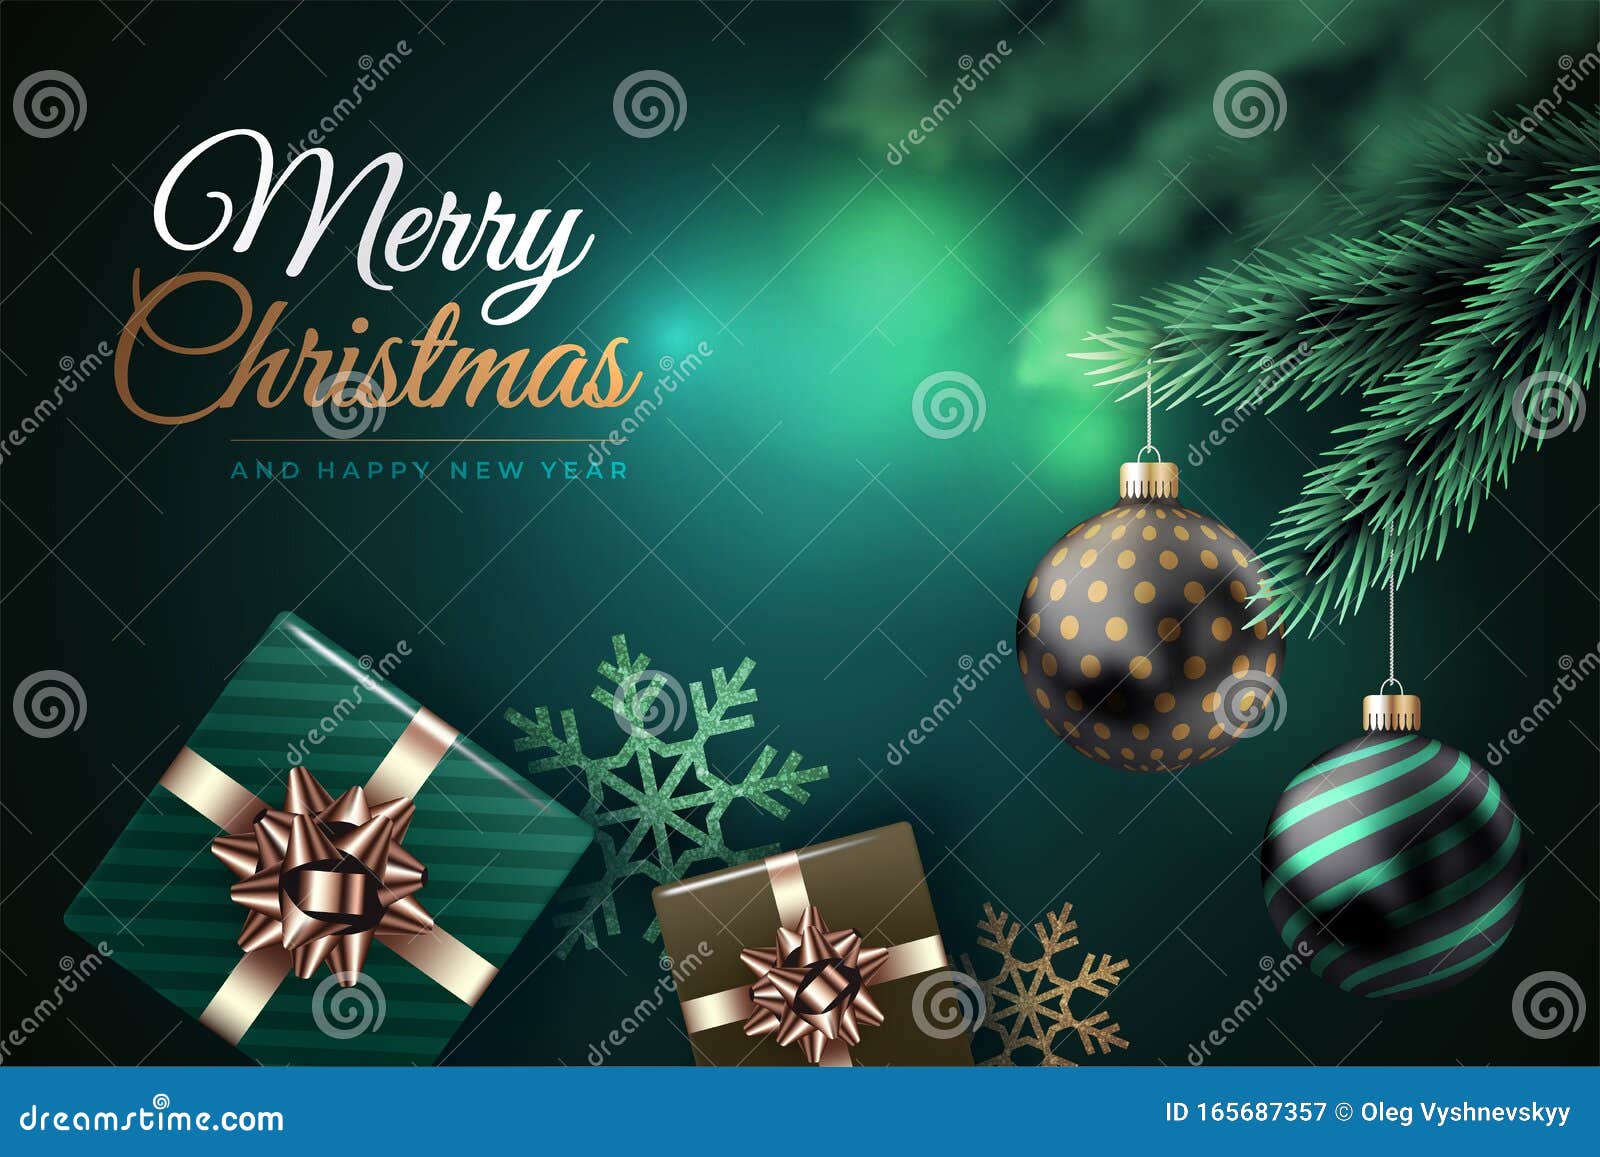 Modern Merry Christmas Background with Balls and Gifts. Happy New ...